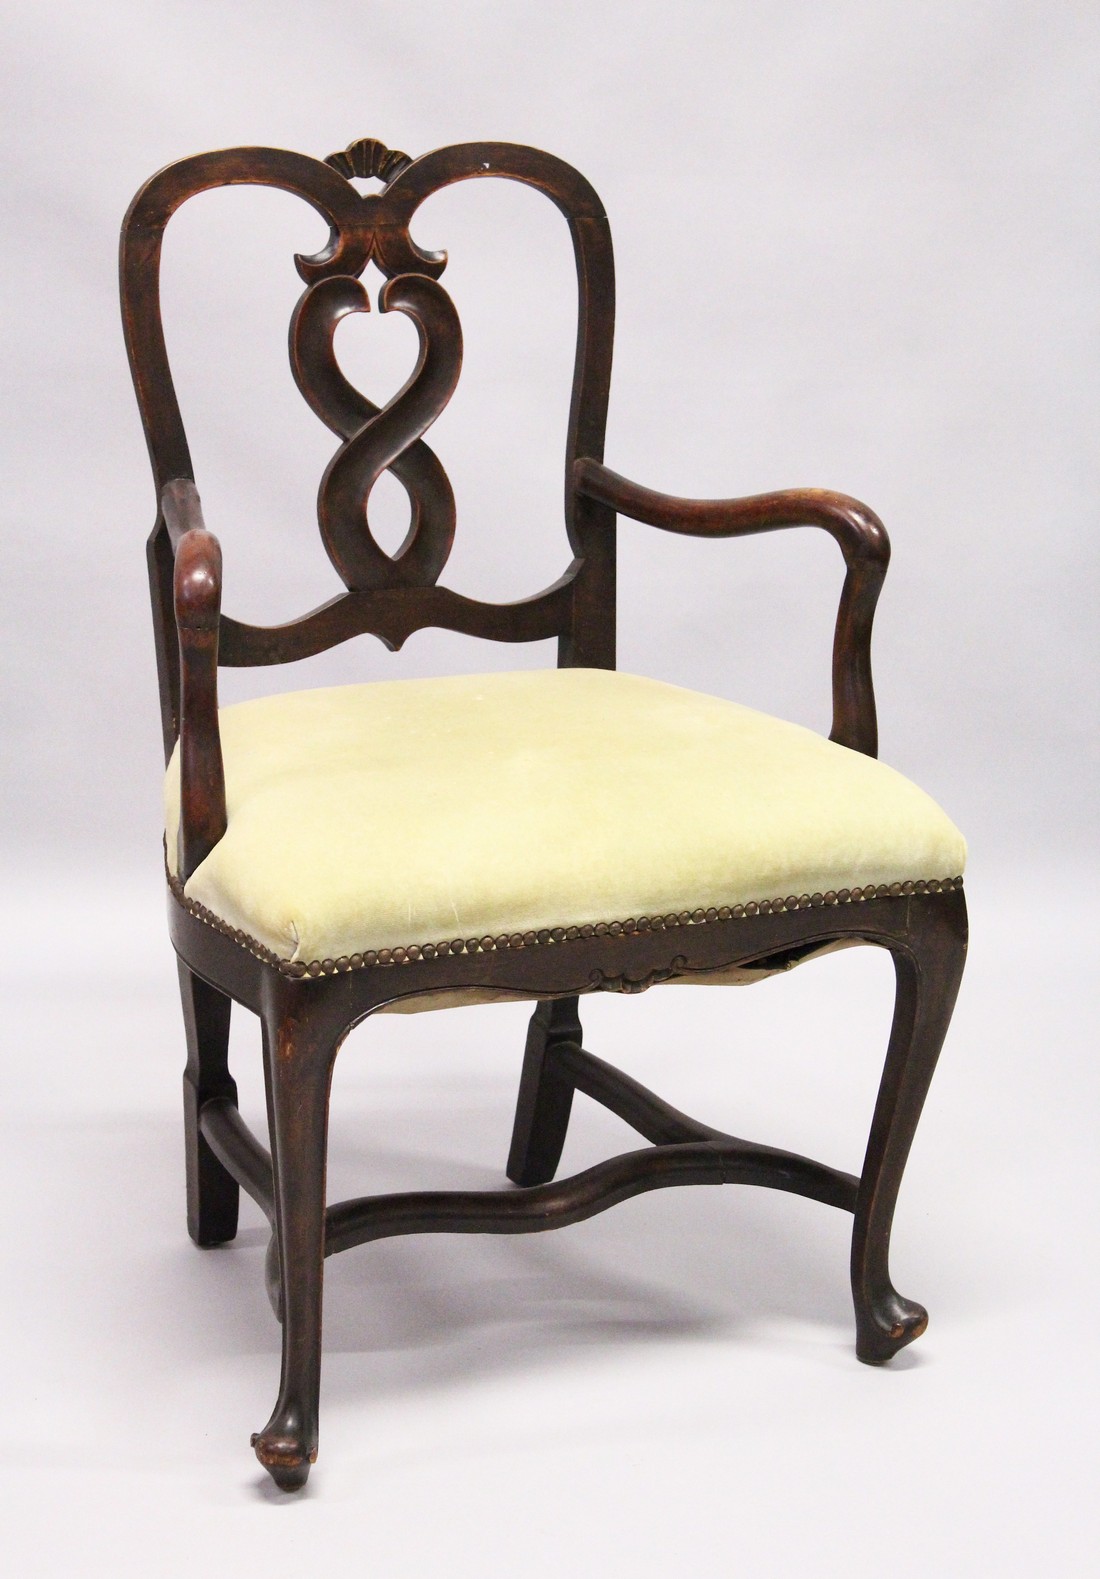 A SMALL GEORGE II DESIGN MAHOGANY OPEN ARMCHAIR with curved cresting, wavy splats, shepherd’s